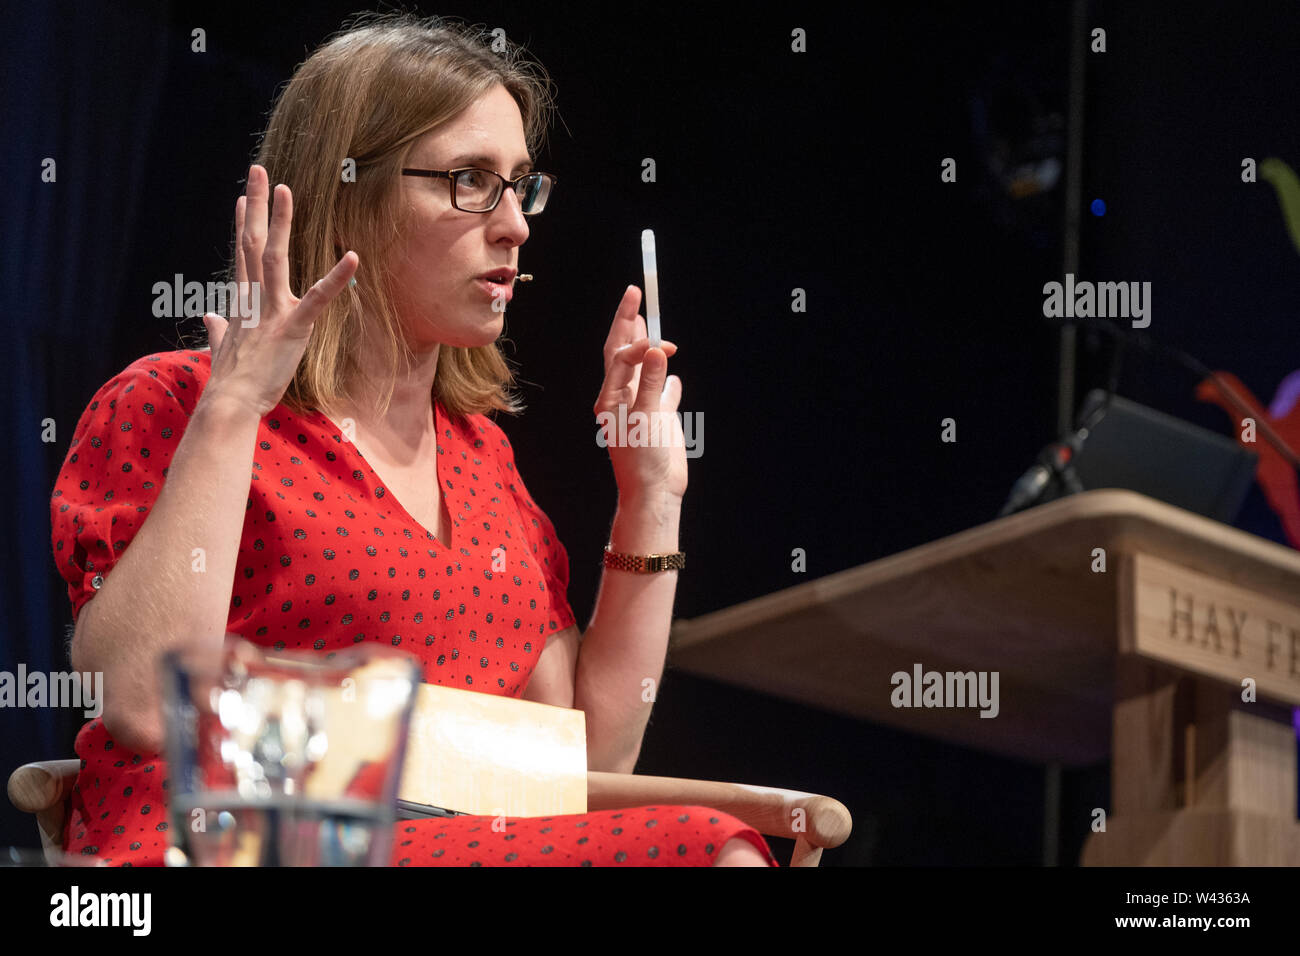 Sarah-Jayne Blakemore FBA Professor of Cognitive Neuroscience at the Institute of Cognitive Neuroscience, University College London and co-director of the Wellcome Trust PhD Programme in Neuroscience at UCL. Appearing at the  32nd annual Hay Festival of Literature and the Arts. Stock Photo